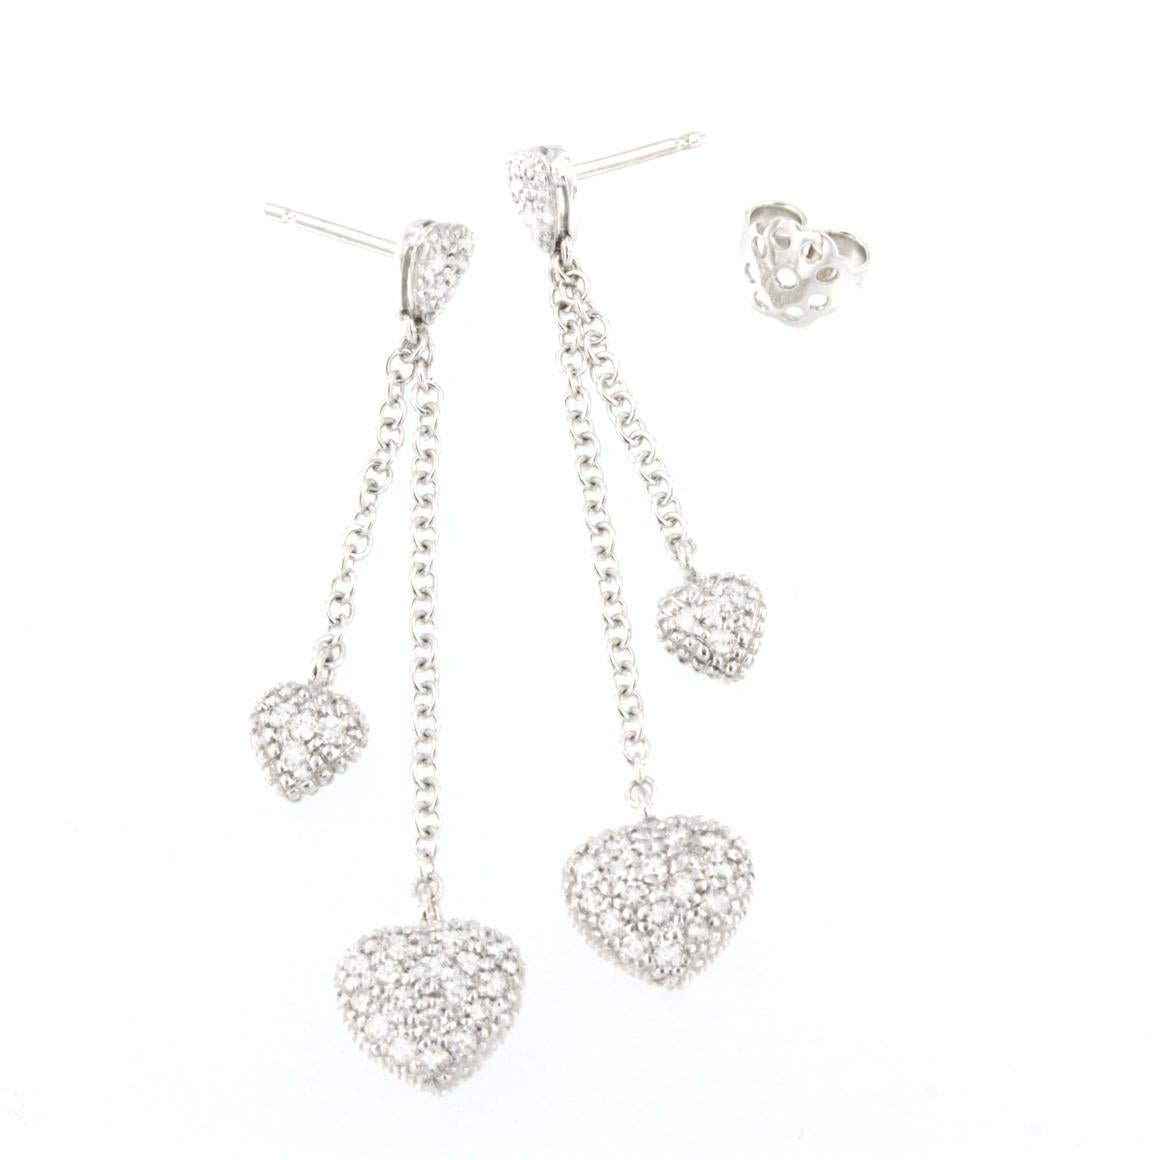 Great idea for Valentine’s Day gift cascade of white Diamonds Hearts . When hearts unite desires will rise.  This earrings has been meticulously crafted from 18-karat gold in Italy by Stanoppi Jewellery since 1948

Earrings in 18k white gold with